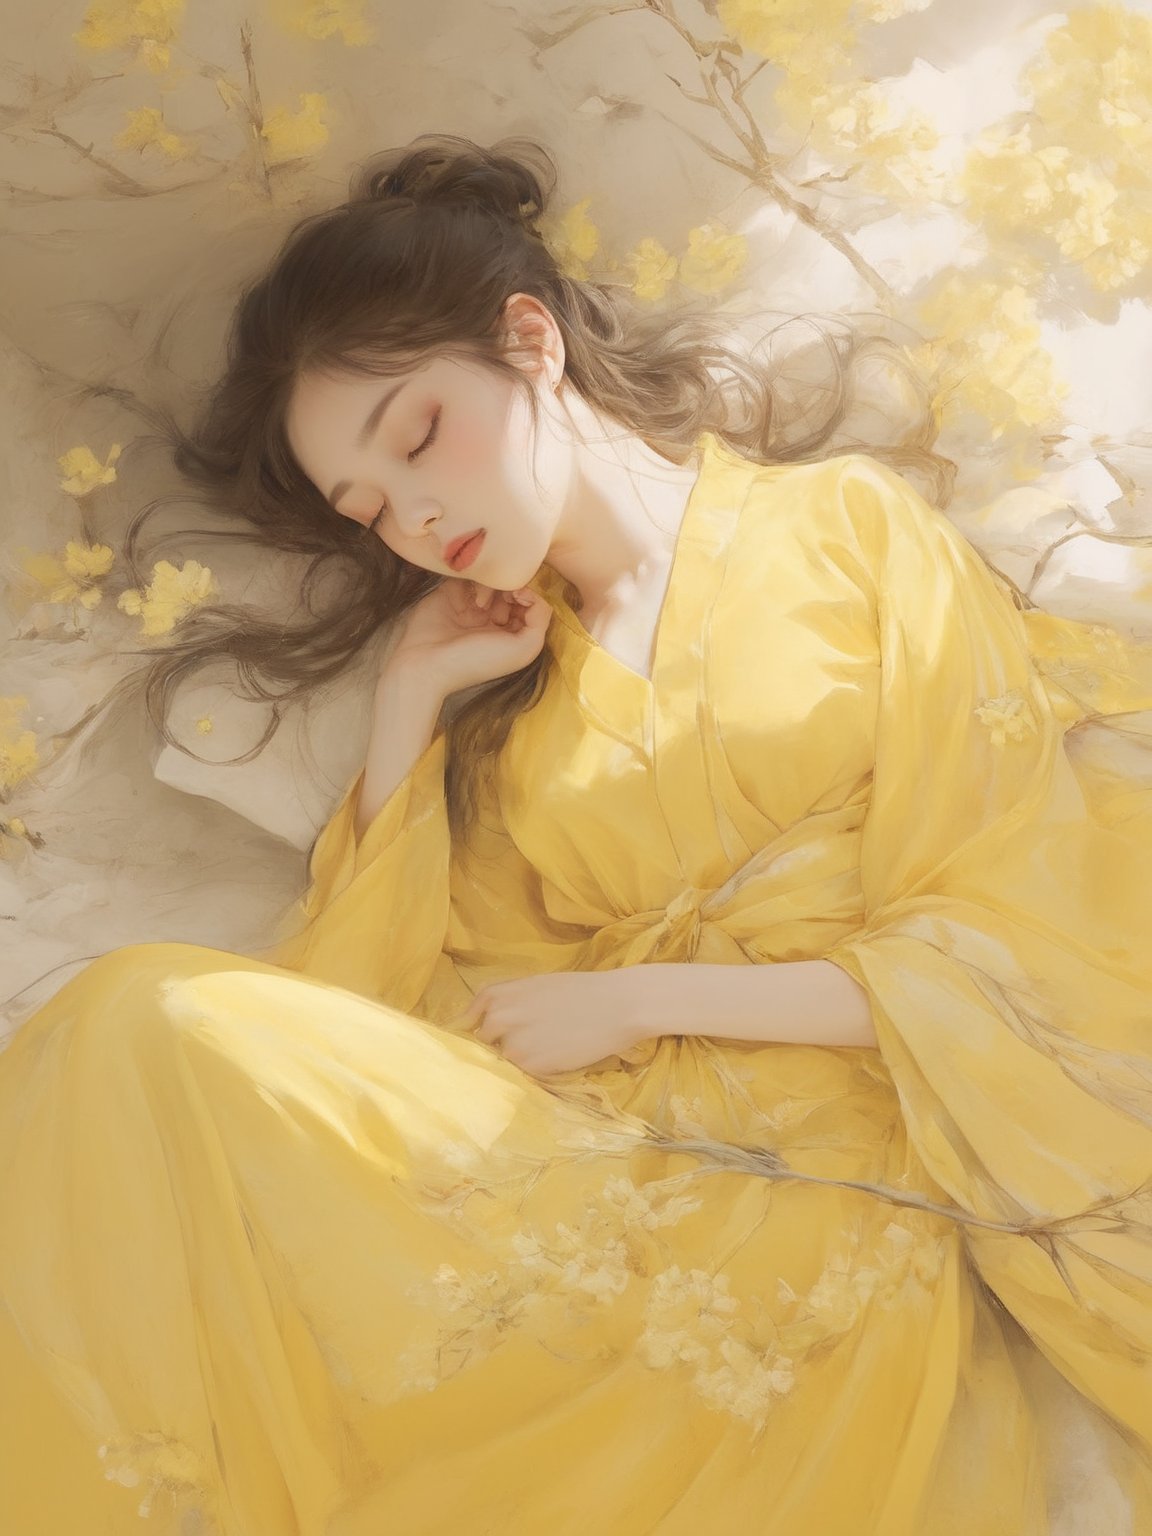 Create a highly detailed, ethereal illustration of an Asian woman peacefully sleeping amidst a bed of yellow flowers. She is dressed in a flowing, elegant yellow robe that blends harmoniously with the surrounding blossoms. Her hair cascades gently around her, and her expression is serene and content. The soft, natural light filters through the flowers, casting a warm, golden glow on her and the scene. The overall composition evokes a sense of tranquility, natural beauty, and timeless elegance, creating a dreamlike and serene atmosphere, natural beauty, and timeless grace, 8k, masterpiece, ultra-realistic, best quality, high resolution, high definition, Chinese style, asian woman, wave, top quality, mystery, oil painting, crazy details, complex composition, strong colors, science fiction, transparency, dynamic lighting Ink style, grayscale, pastels, mysterious atmosphere, delicate brushstrokes, frontal composition, wind and clouds, Dynamic shots of flowing ink: Photorealistic masterpieces in 8k resolution: Aaron Hawkey and Jeremy Mann: Intricate fluid gouaches: Jean Bart tiste monger: Calligraphy: Cene: Colorful watercolor art, professional photography, volumetric light maximization photography: by marton bobzert: complexity, refinement, elegance, vastness, fantasy, dark composites, octane rendering, DonMASKTexXL, painted world in 8k resolution concept art, Fantasy Art, Oil Painting, Kabuki, Impressionist PaintingJapanese style, white cat, wave, top quality, mystery, oil painting, crazy details, complex composition, strong colors, science fiction, transparency, dynamic lighting Ink style, grayscale, pastels, mysterious atmosphere, delicate brushstrokes, frontal composition, wind and clouds, Dynamic shots of flowing ink: Photorealistic masterpieces in 8k resolution: Aaron Hawkey and Jeremy Mann: Intricate fluid gouaches: Jean Bart tiste monger: Calligraphy: Cene: Colorful watercolor art, professional photography, volumetric light maximization photography: by marton bobzert: complexity, refinement, elegance, vastness, fantasy, dark composites, octane rendering, DonMASKTexXL, painted world in 8k resolution concept art, Fantasy Art, Oil Painting, Kabuki, Impressionist Painting
Chinese style, asian woman, wave, top quality, mystery, oil painting, crazy details, complex composition, strong colors, science fiction, transparency, dynamic lighting
Ink style, grayscale, pastels, mysterious atmosphere, delicate brushstrokes, frontal composition, wind and clouds,
Dynamic shots of flowing ink: Photorealistic masterpieces in 8k resolution: Aaron Hawkey and Jeremy Mann: Intricate fluid gouaches: Jean Bart tiste monger: Calligraphy: Cene: Colorful watercolor art, professional photography, volumetric light maximization photography: by marton bobzert: complexity, refinement, elegance, vastness, fantasy, dark composites, octane rendering, DonMASKTexXL, painted world in 8k resolution concept art, Fantasy Art, Oil Painting, Kabuki, Impressionist Painting